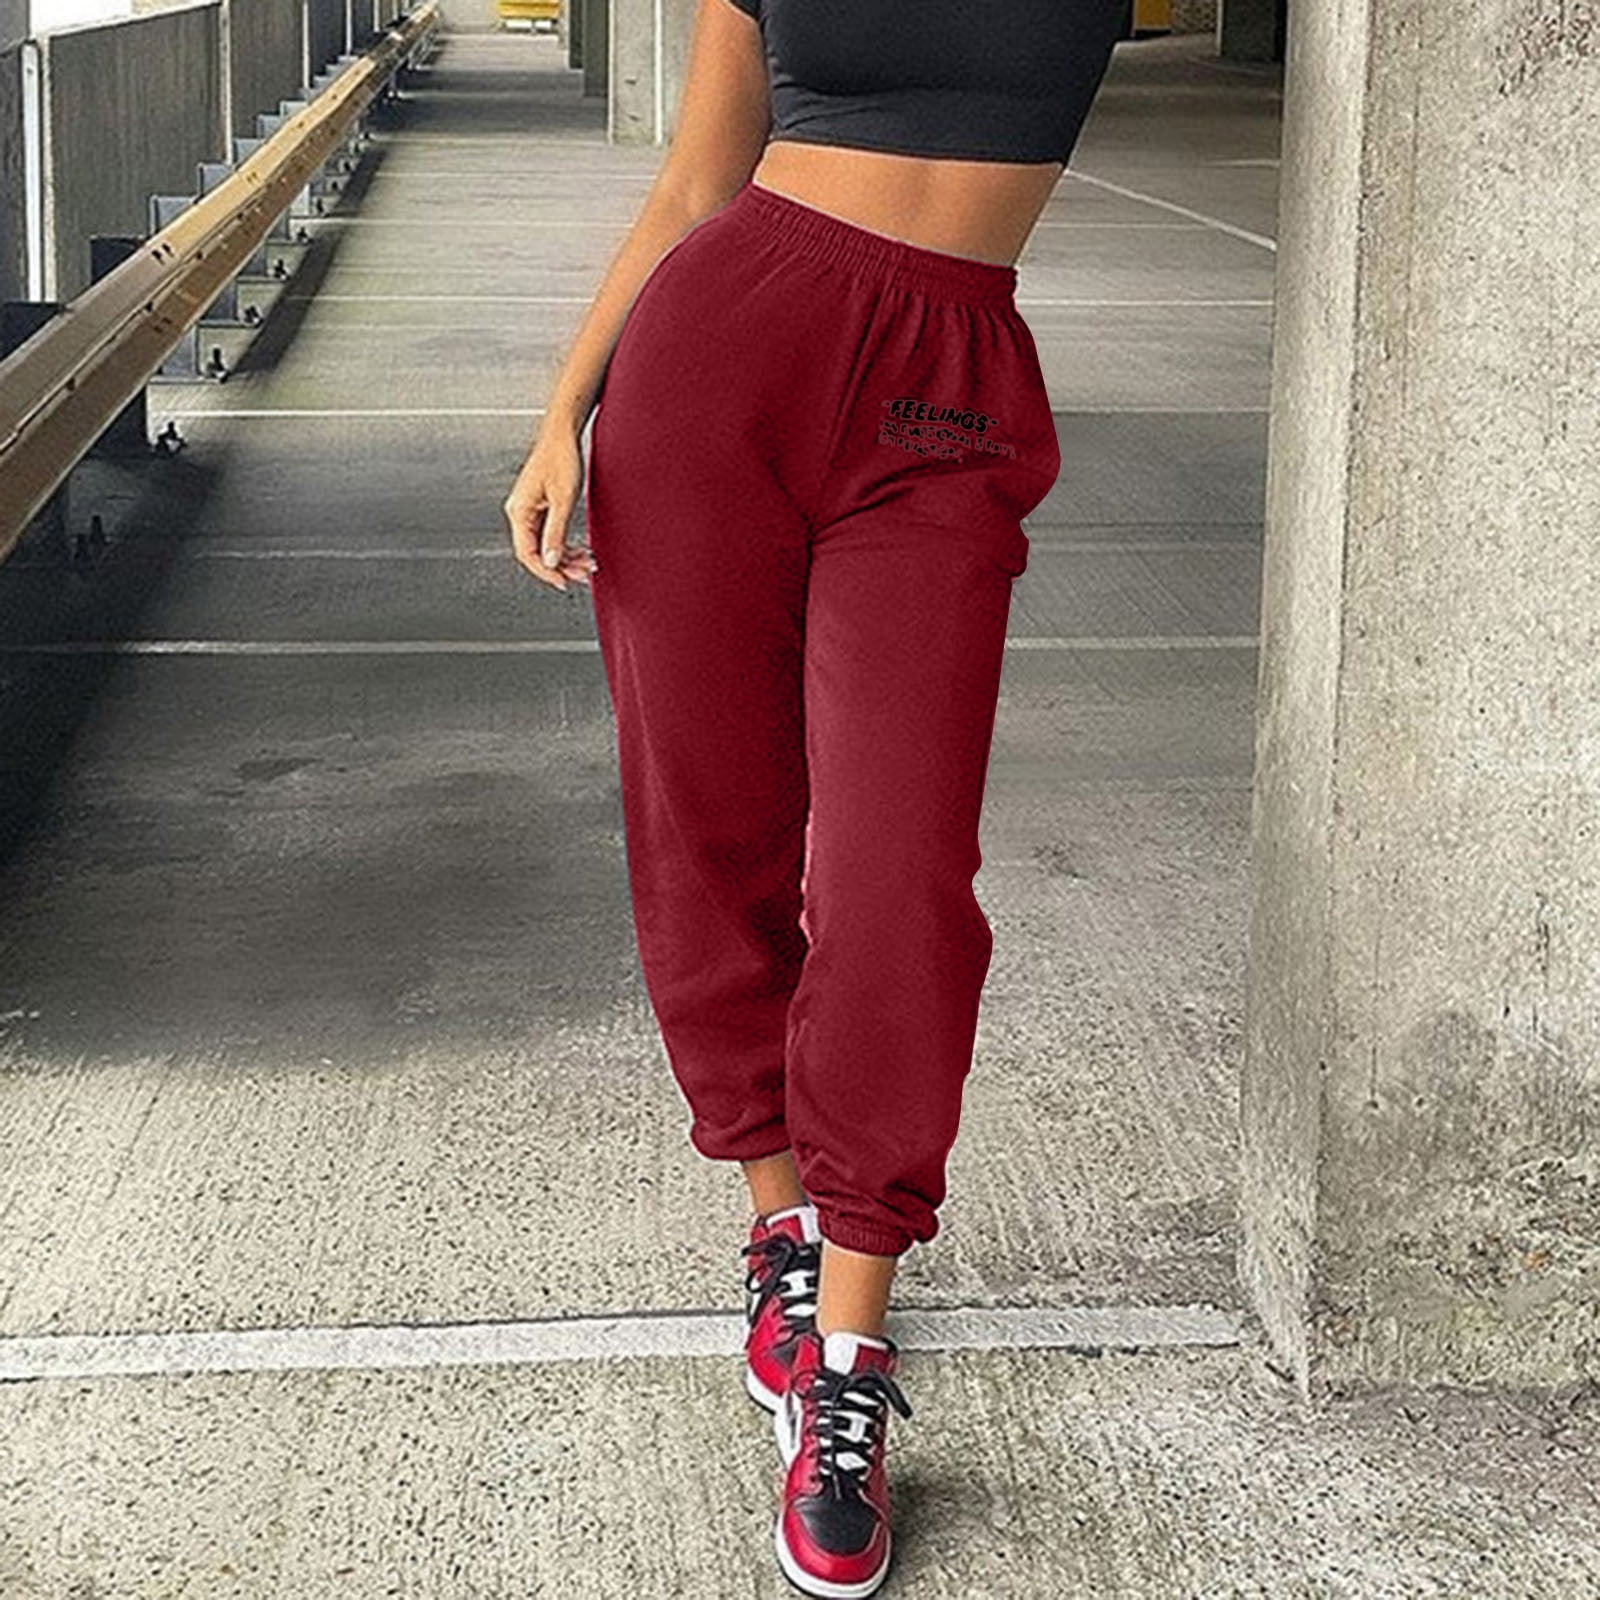 Aayomet Joggers For Women High Waist Womens Sweatpants Pockets High Waist  Sporty Fit Jogger Pants Lounge Trousers Sports Sweatpants,Red S 